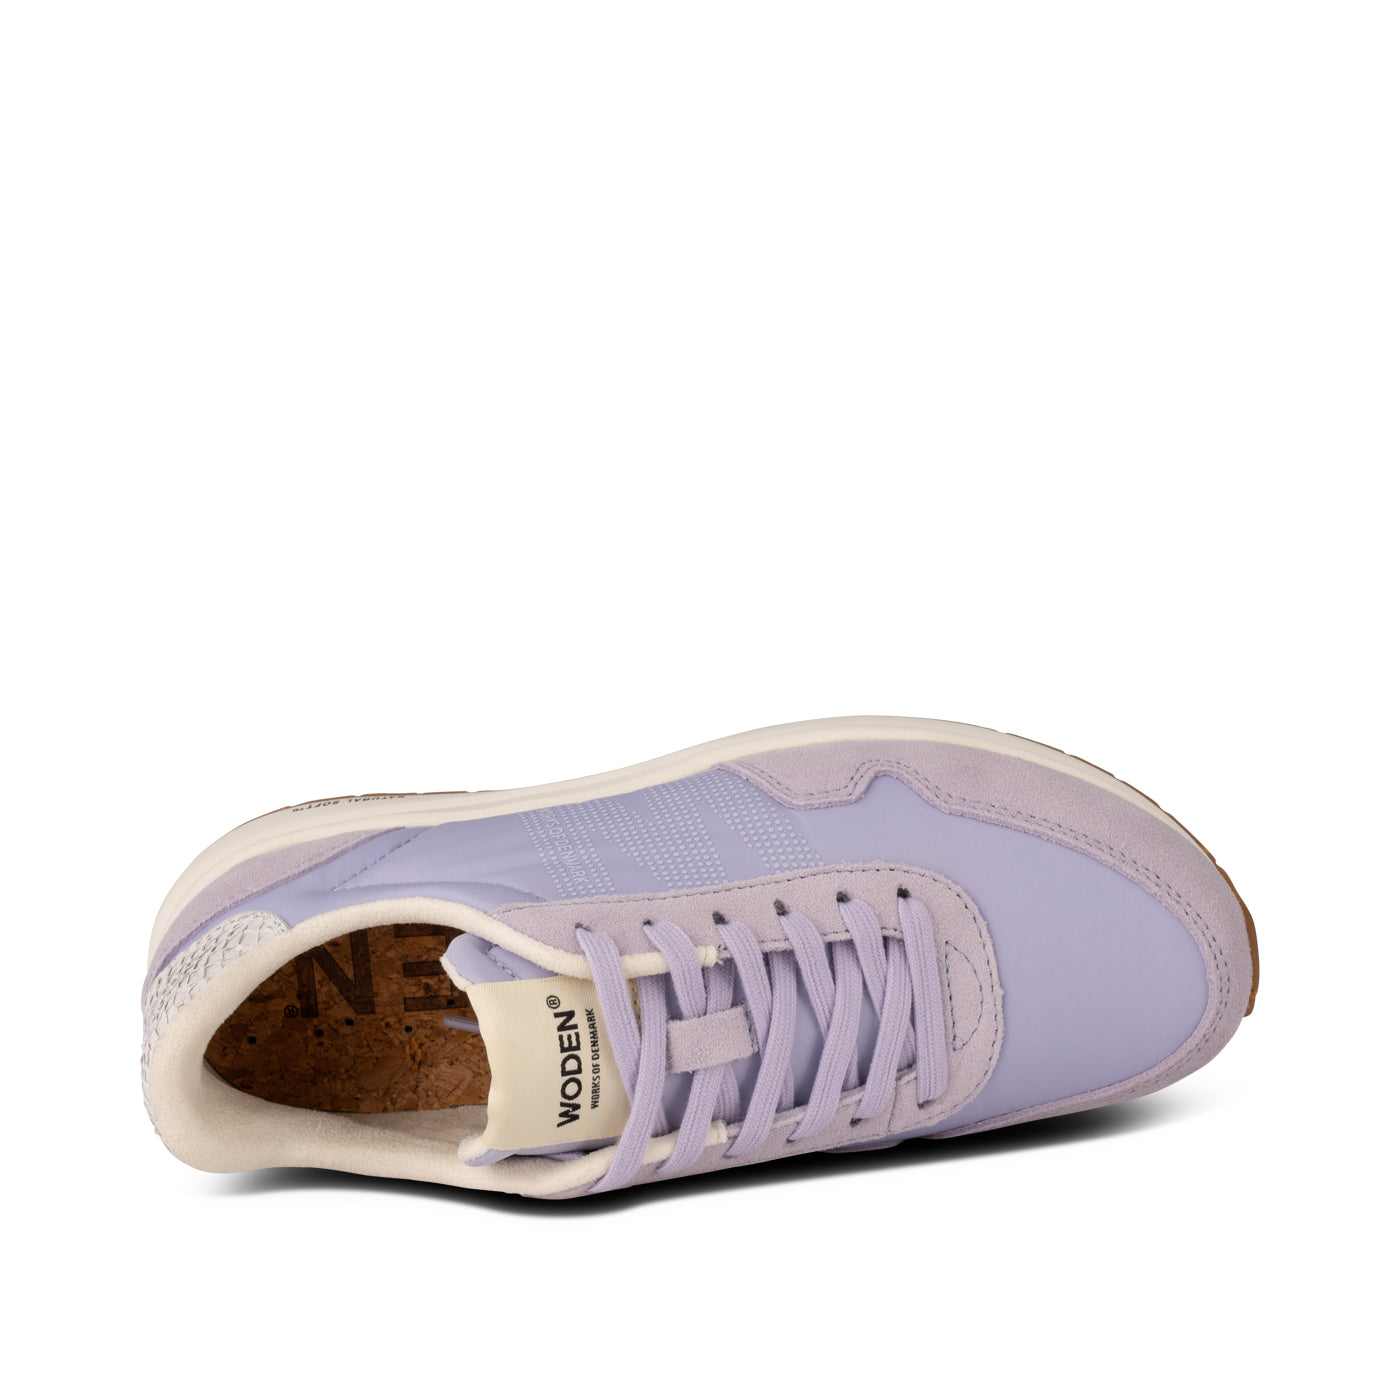 WODEN Nora Natural Soft Sneakers 319 Space